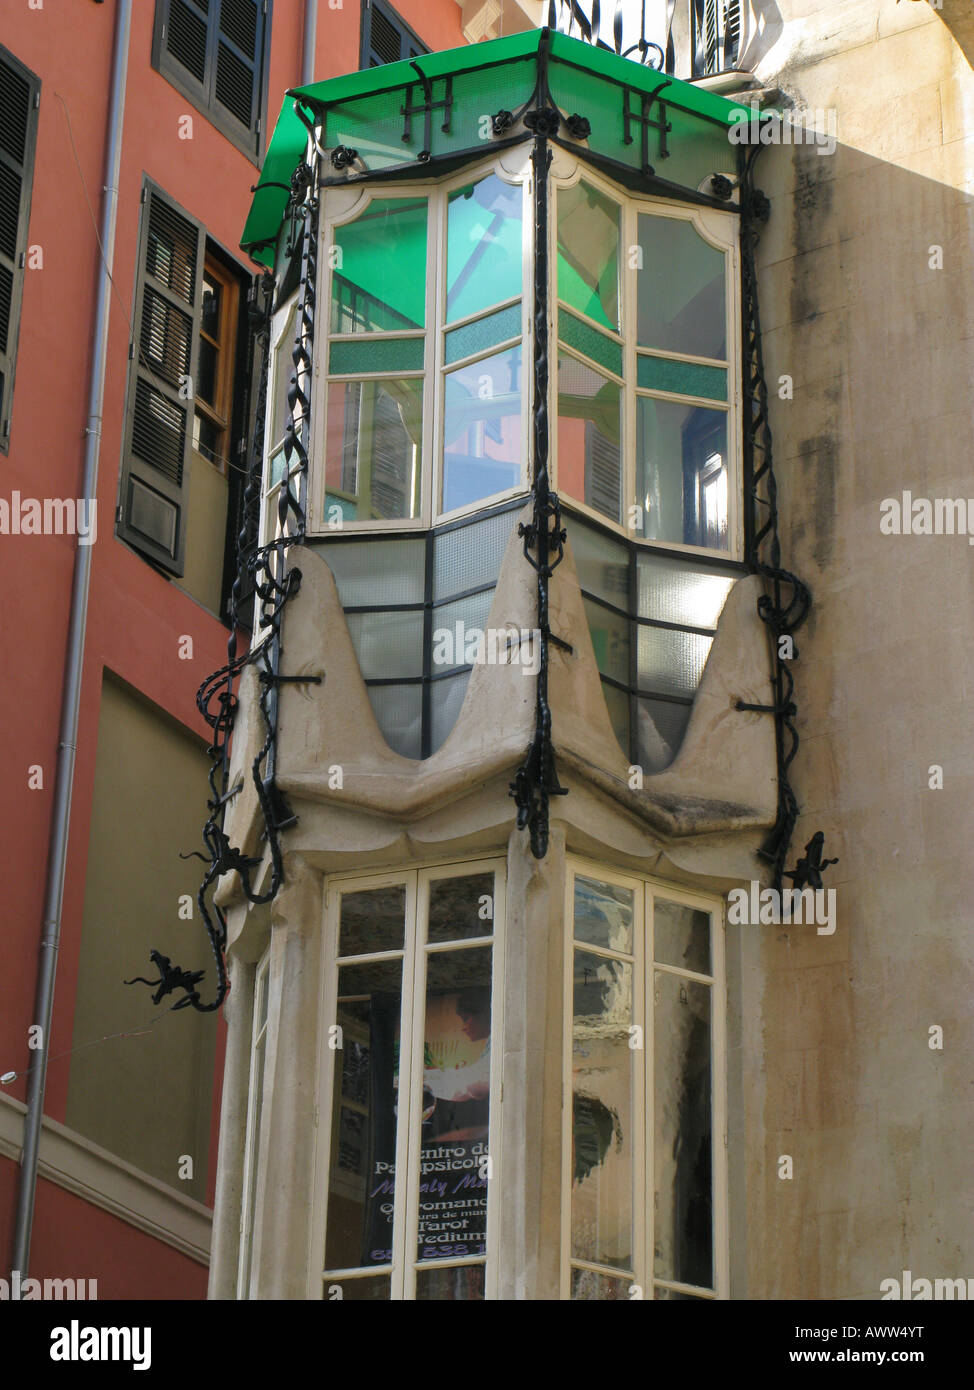 Enclosed glass balcony, or bay window, with green roof, Palma, Mallorca, Spain Stock Photo